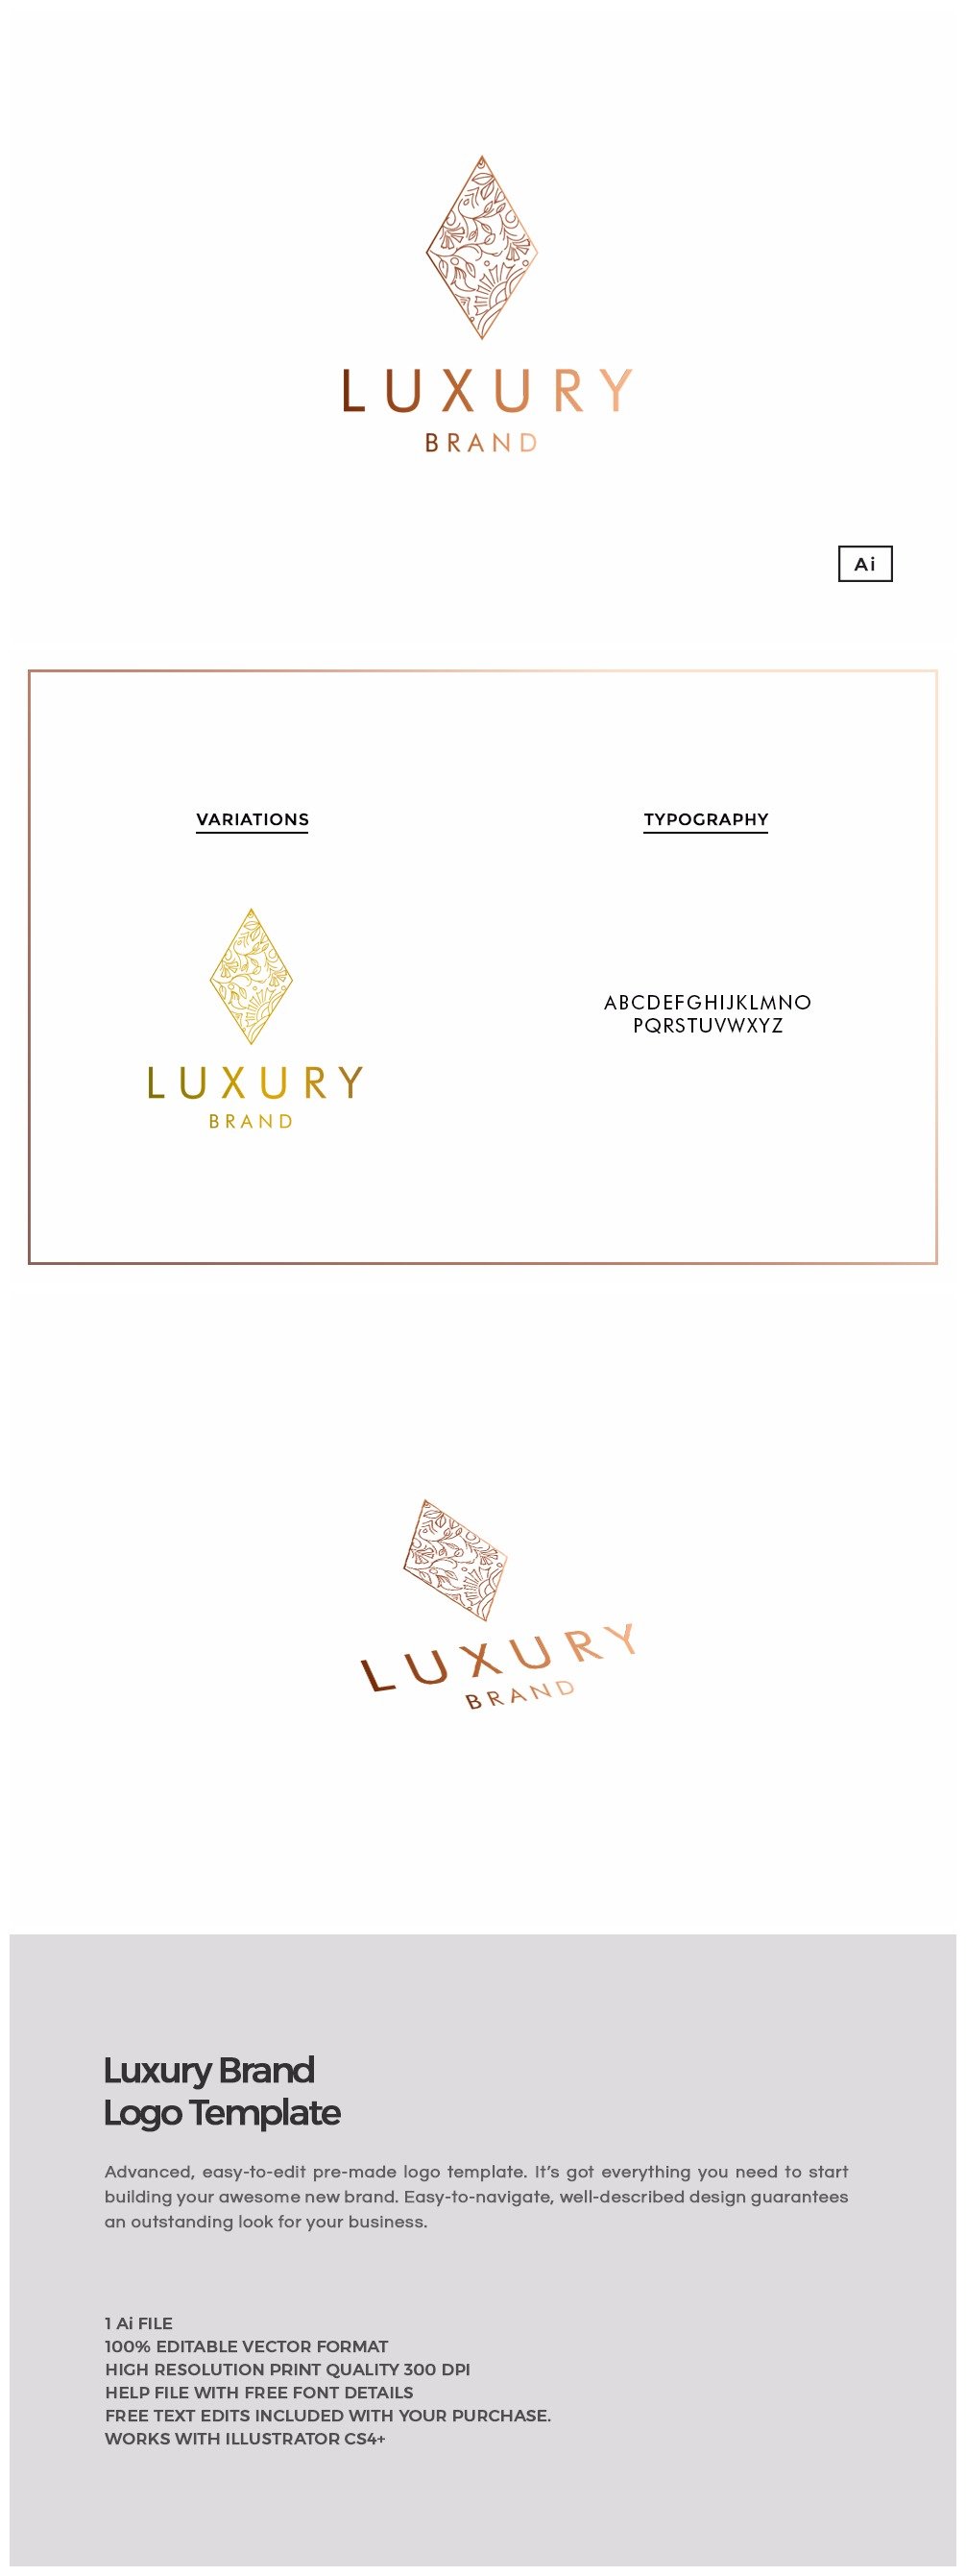 Rose Gold Luxury Brand Logo Template cover image.